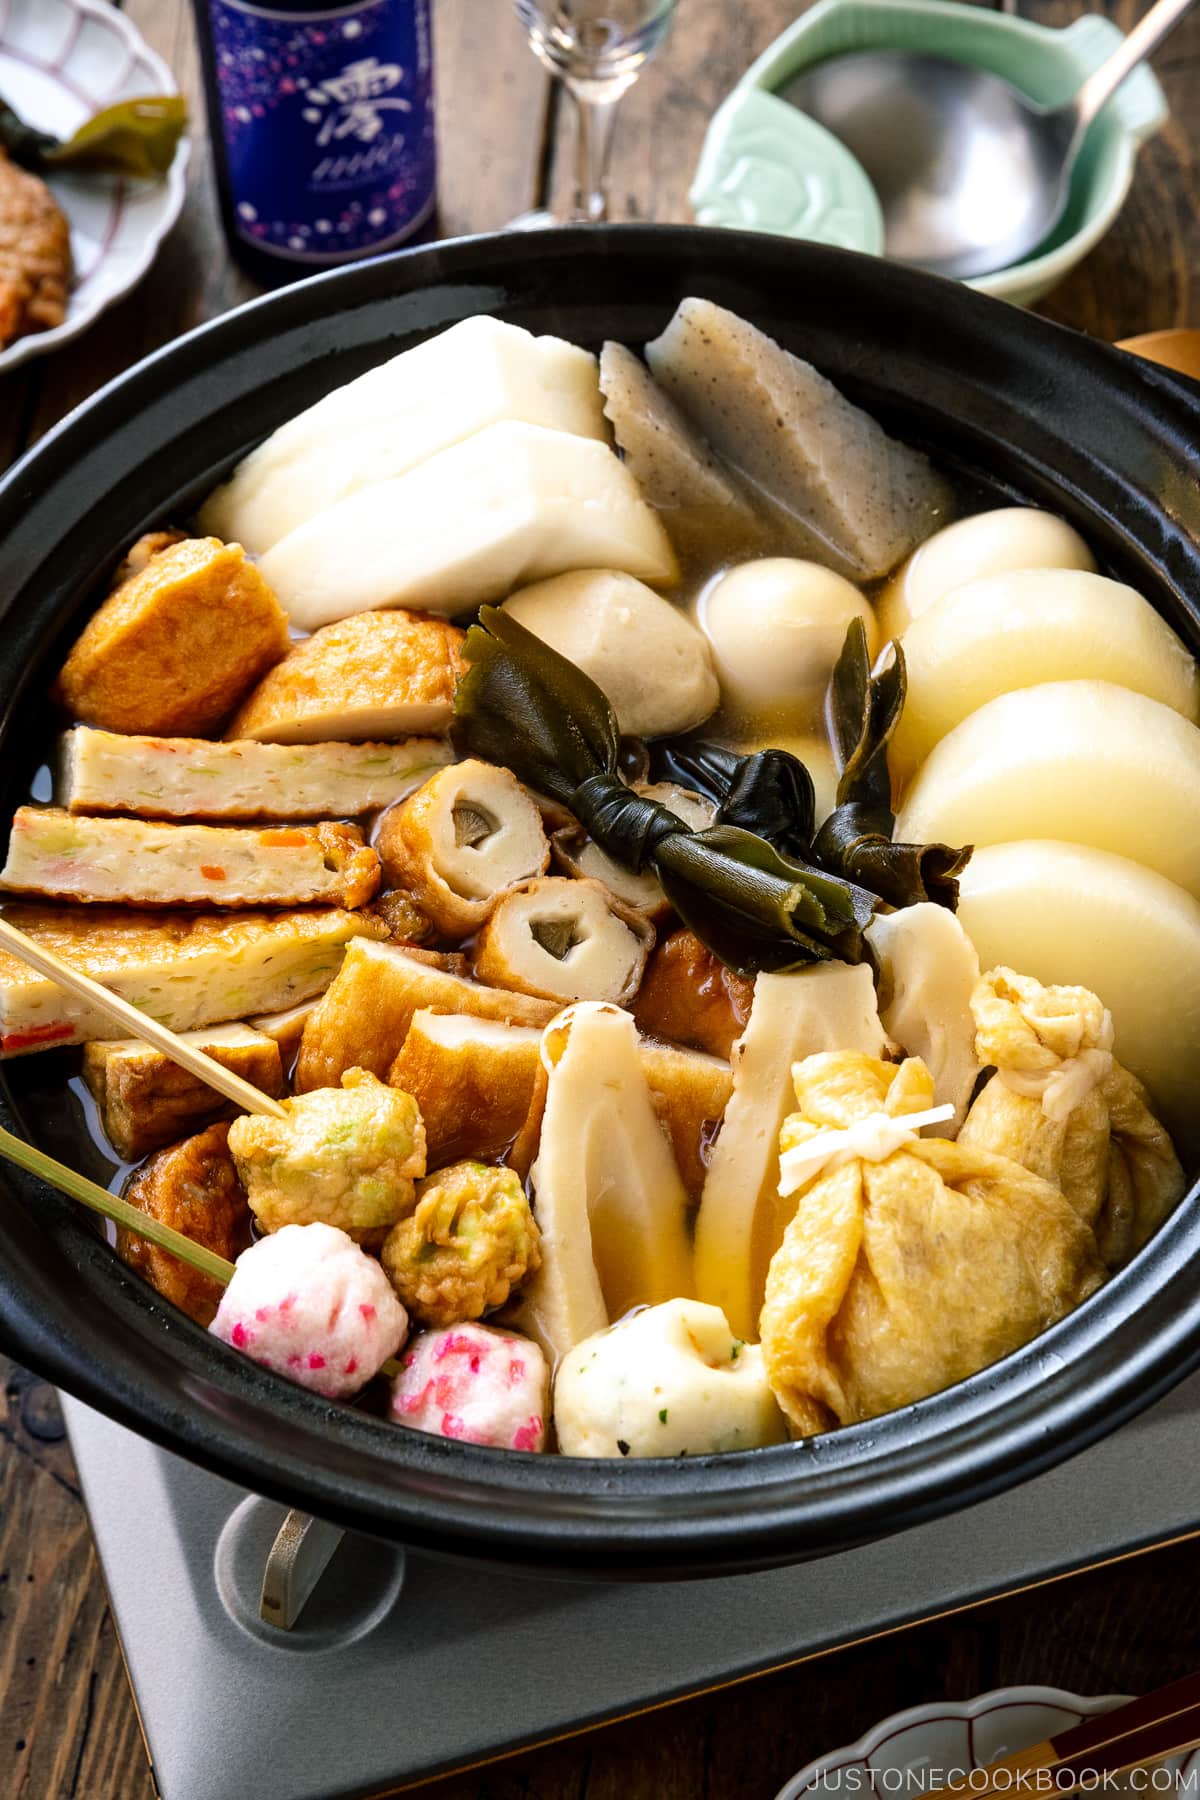 A donabe clay pot containing Japanese fish cake stew called oden, an assortment of fish balls and fish cakes.